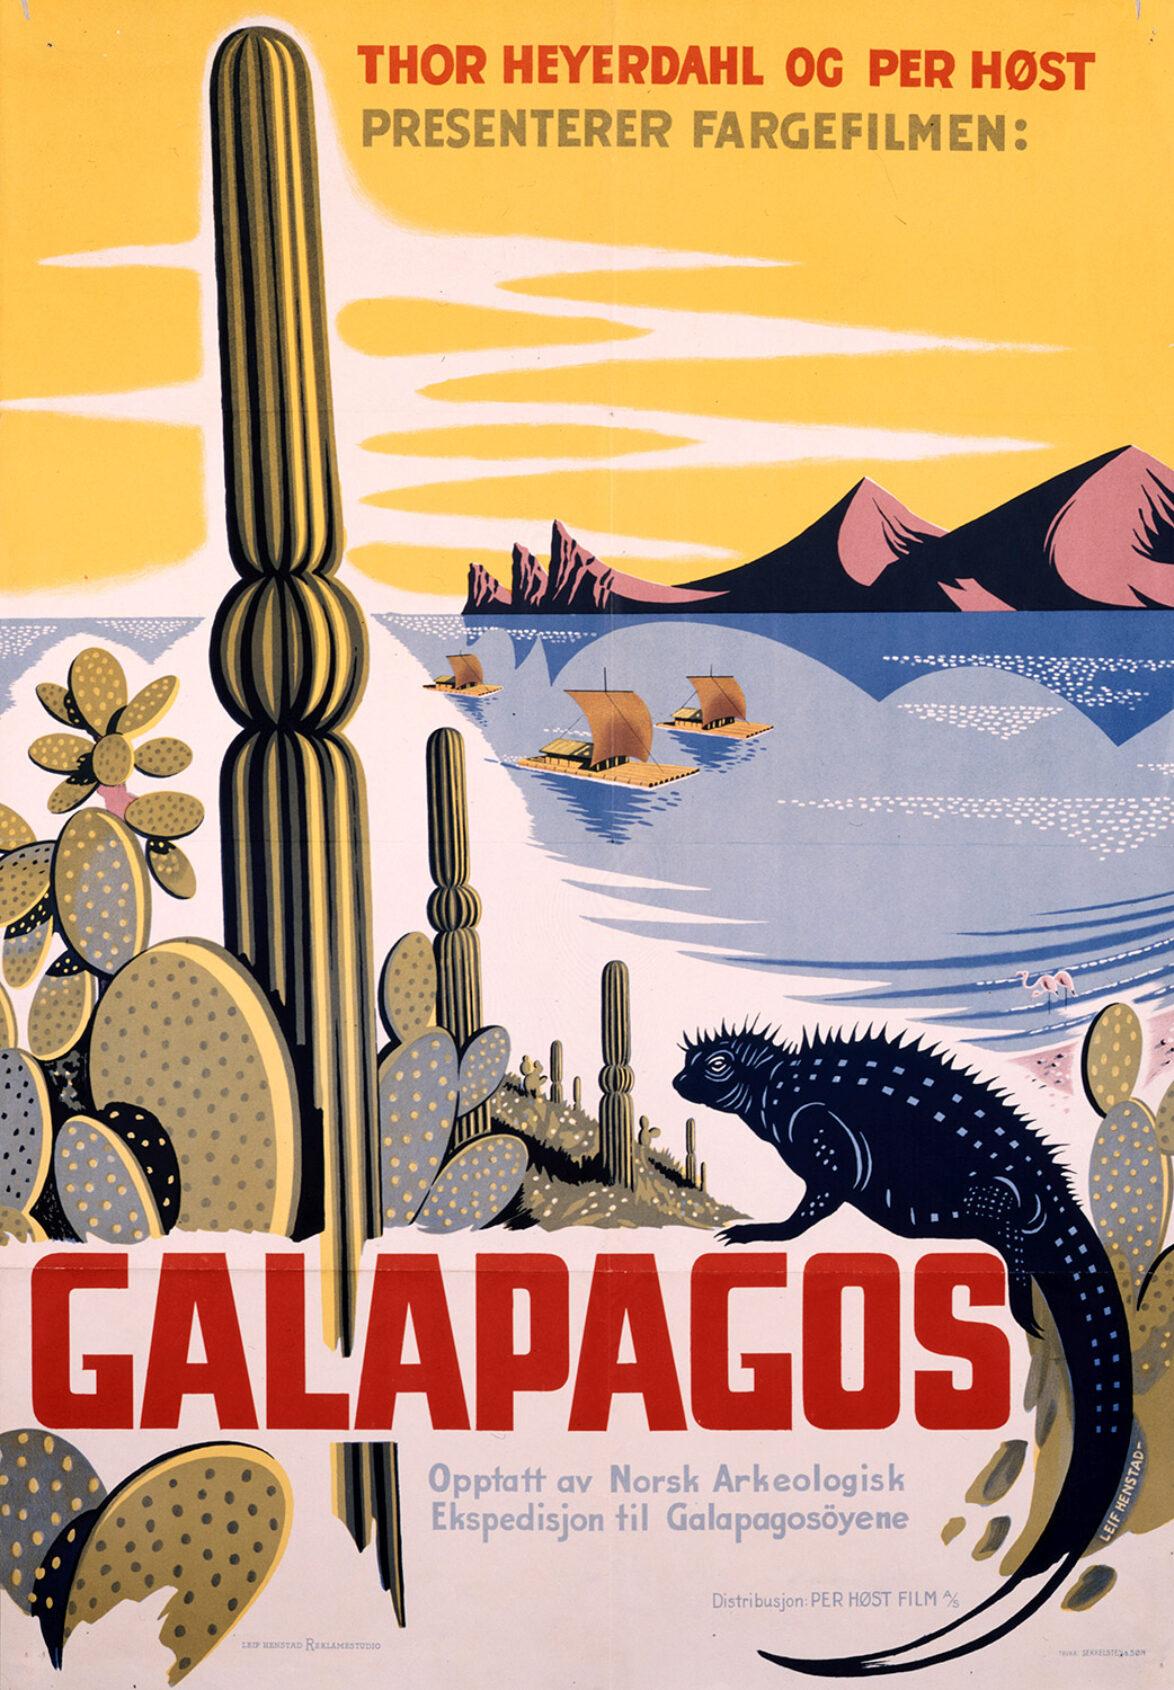 Leif Henstad's poster for Heyerdahl's documentary film about the Galapagos expedition